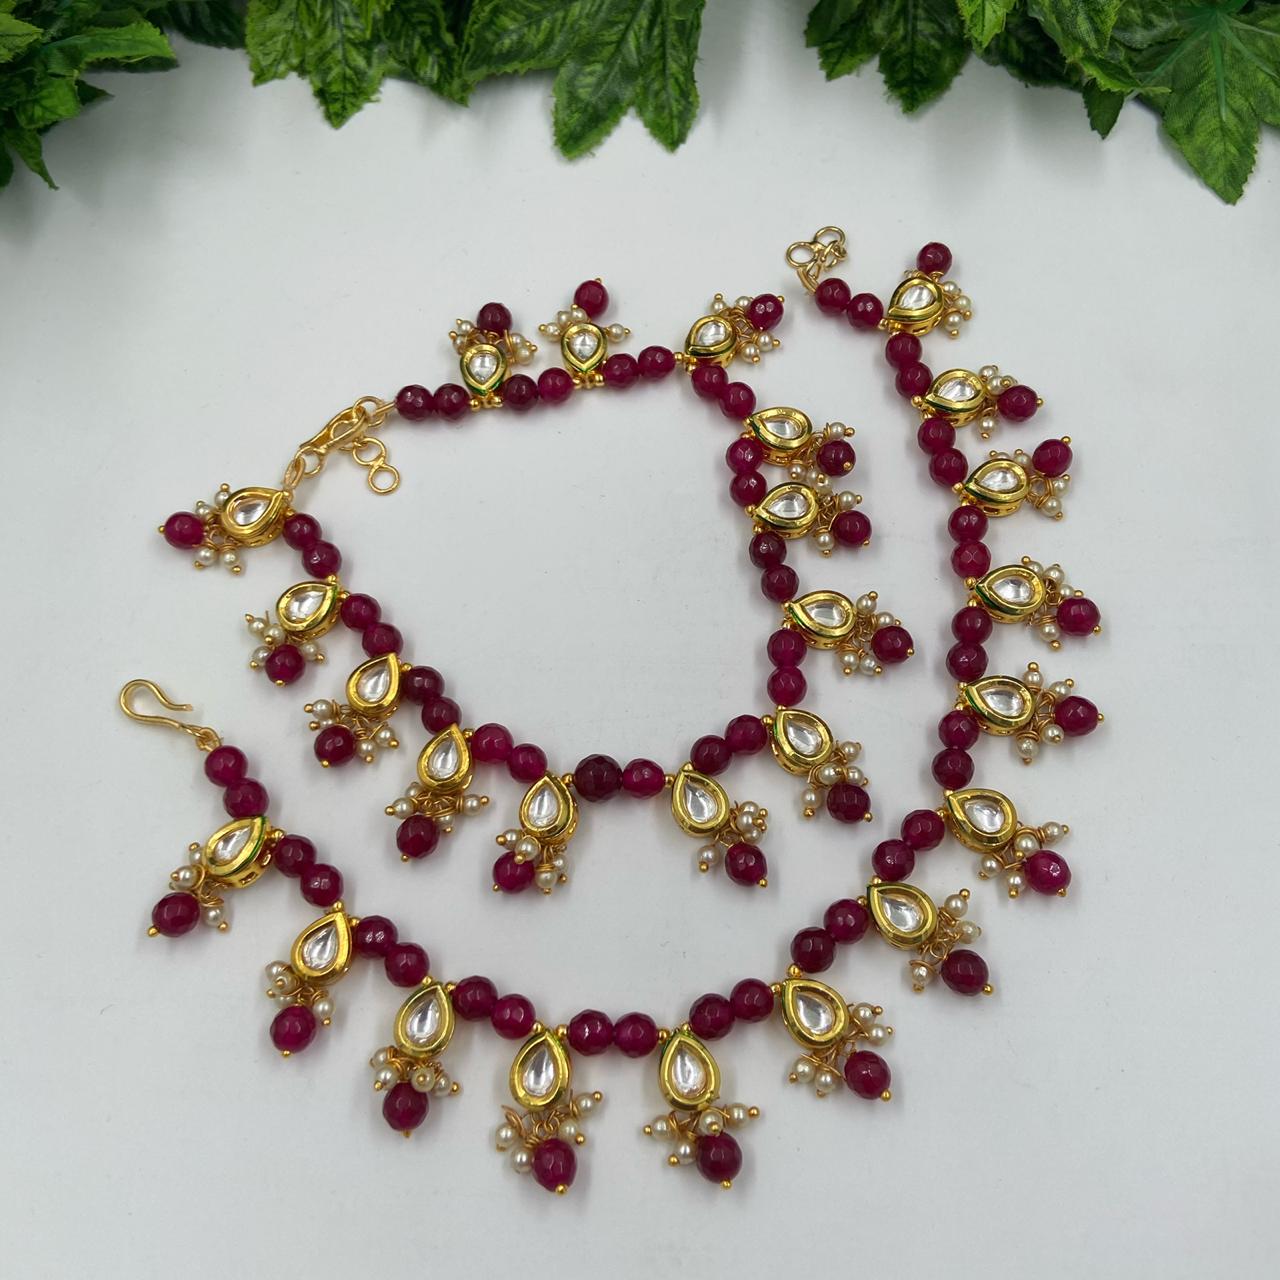 Designer Kundan And Beads Ruby Red Payal Anklet For Ladies By Gehna Shop payal